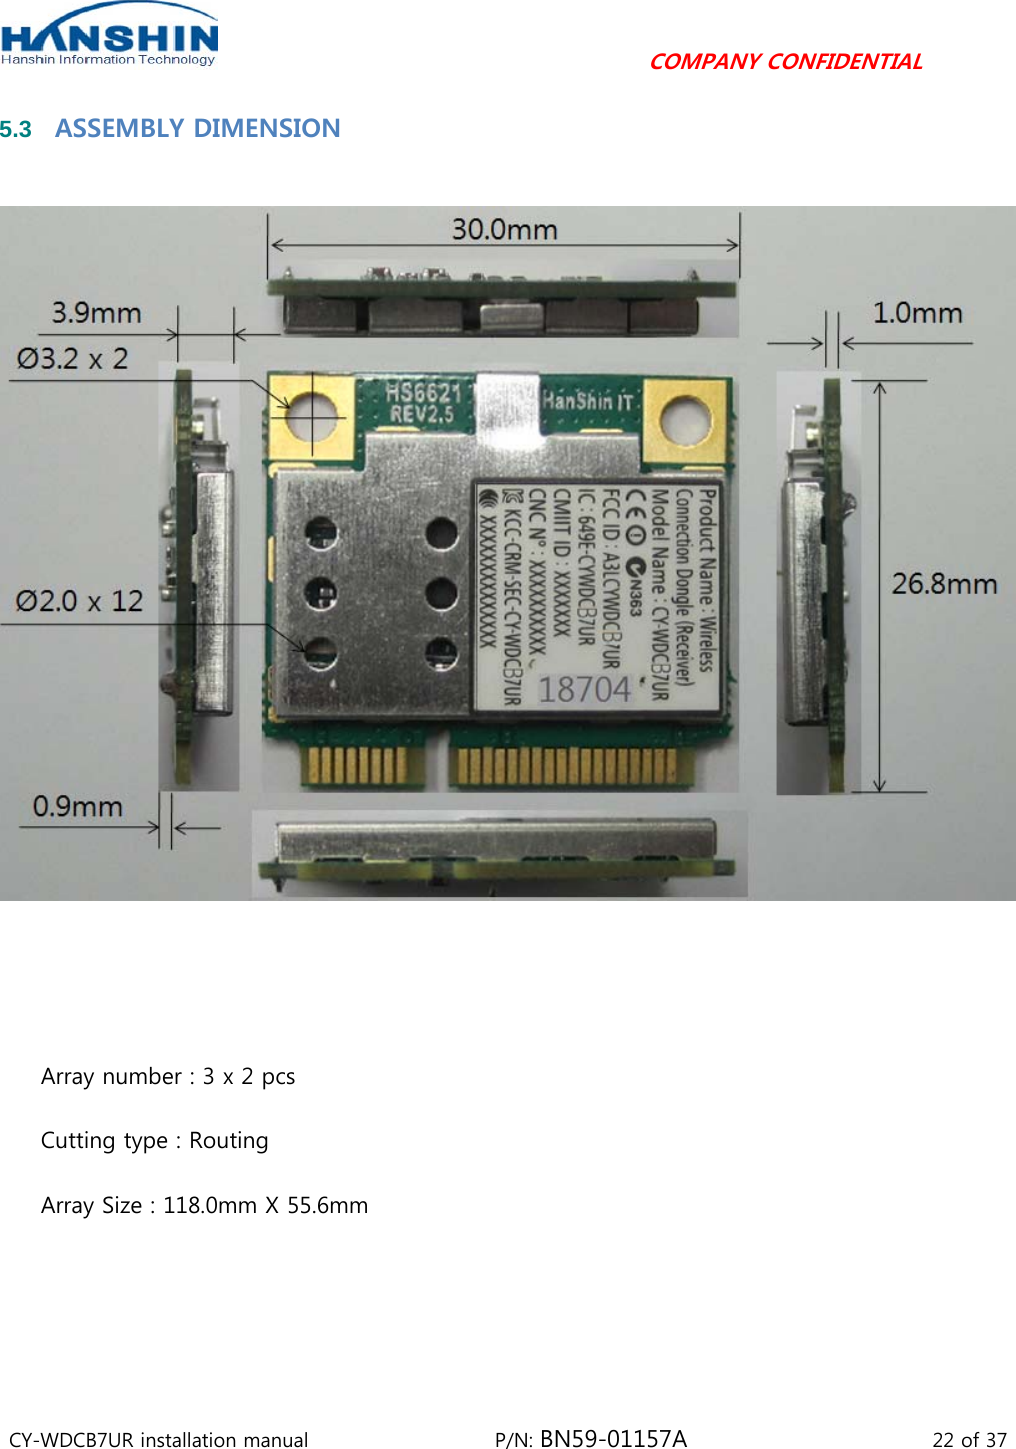                                         COMPANY CONFIDENTIAL CY-WDCB7UR installation manual                   P/N: BN59-01157A                         22 of 37 5.3  ASSEMBLY DIMENSION       Array number : 3 x 2 pcs Cutting type : Routing Array Size : 118.0mm X 55.6mm 